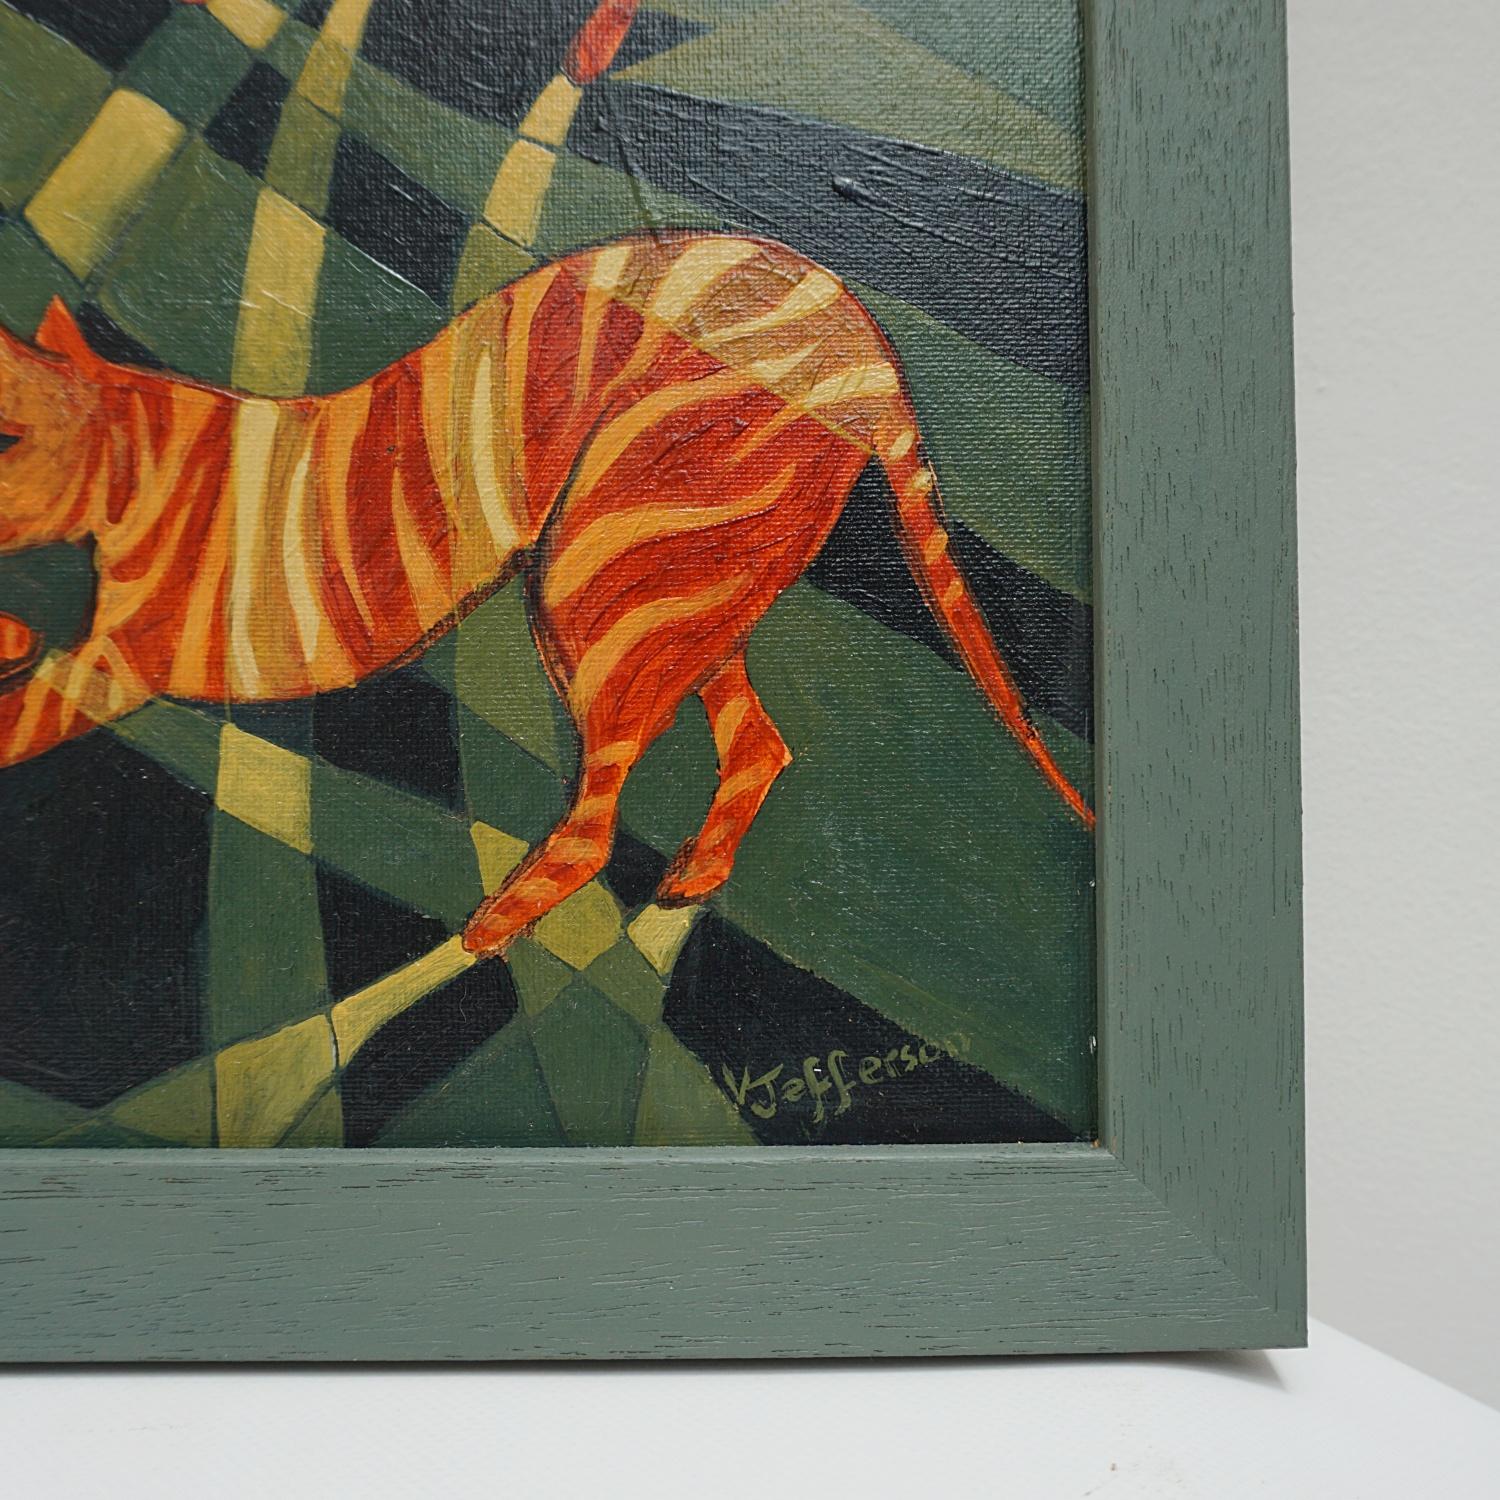 'Ginger Cats', A contemporary oil on canvas painting by Vera Jefferson depicting striped cats amongst a stylised abstract background. Signed V Jefferson to lower right. 

Dimensions: H 44.5cm W 44.5cm 

 Vera Jefferson trained at Goldsmiths